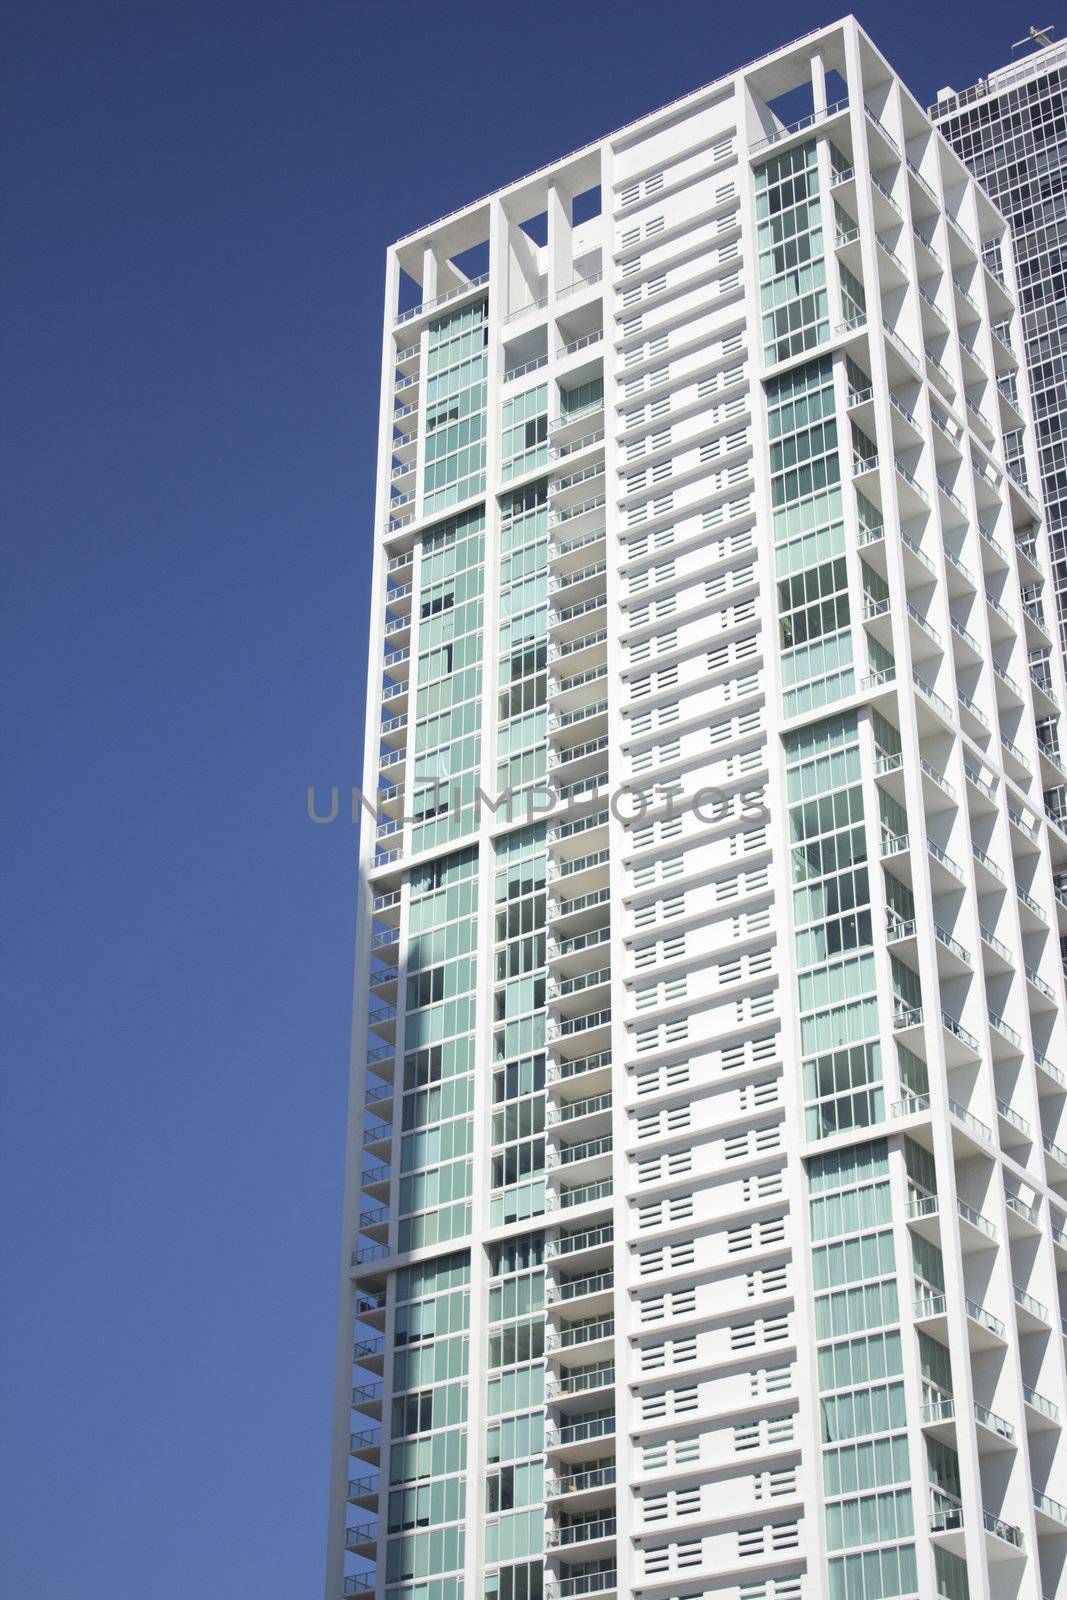 Office Buildings or Condos with a blue sky by jeremywhat